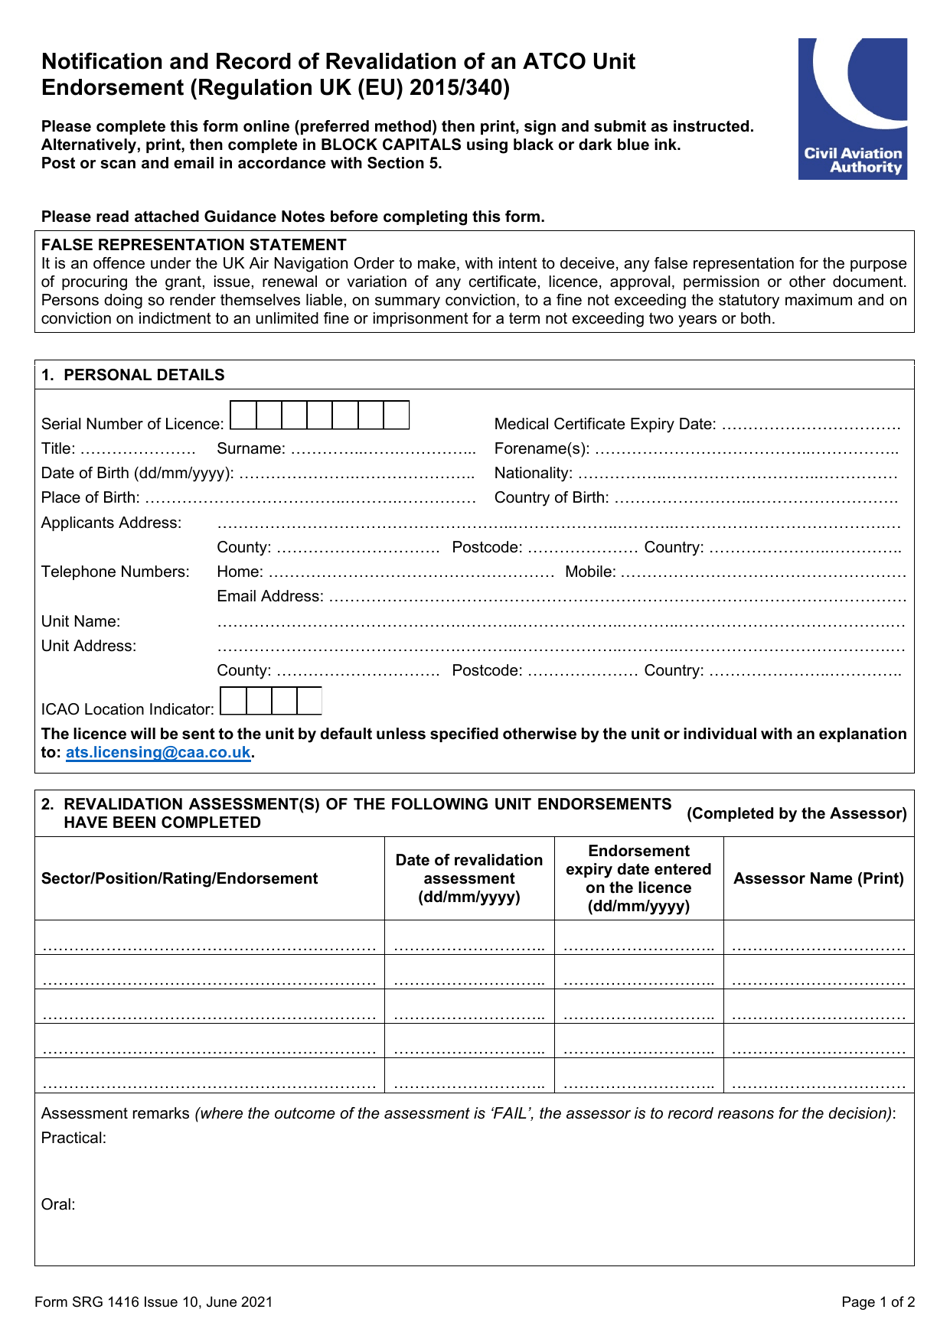 Form SRG1416 Notification and Record of Revalidation of an Atco Unit Endorsement (Regulation UK (Eu) 2015 / 340) - United Kingdom, Page 1